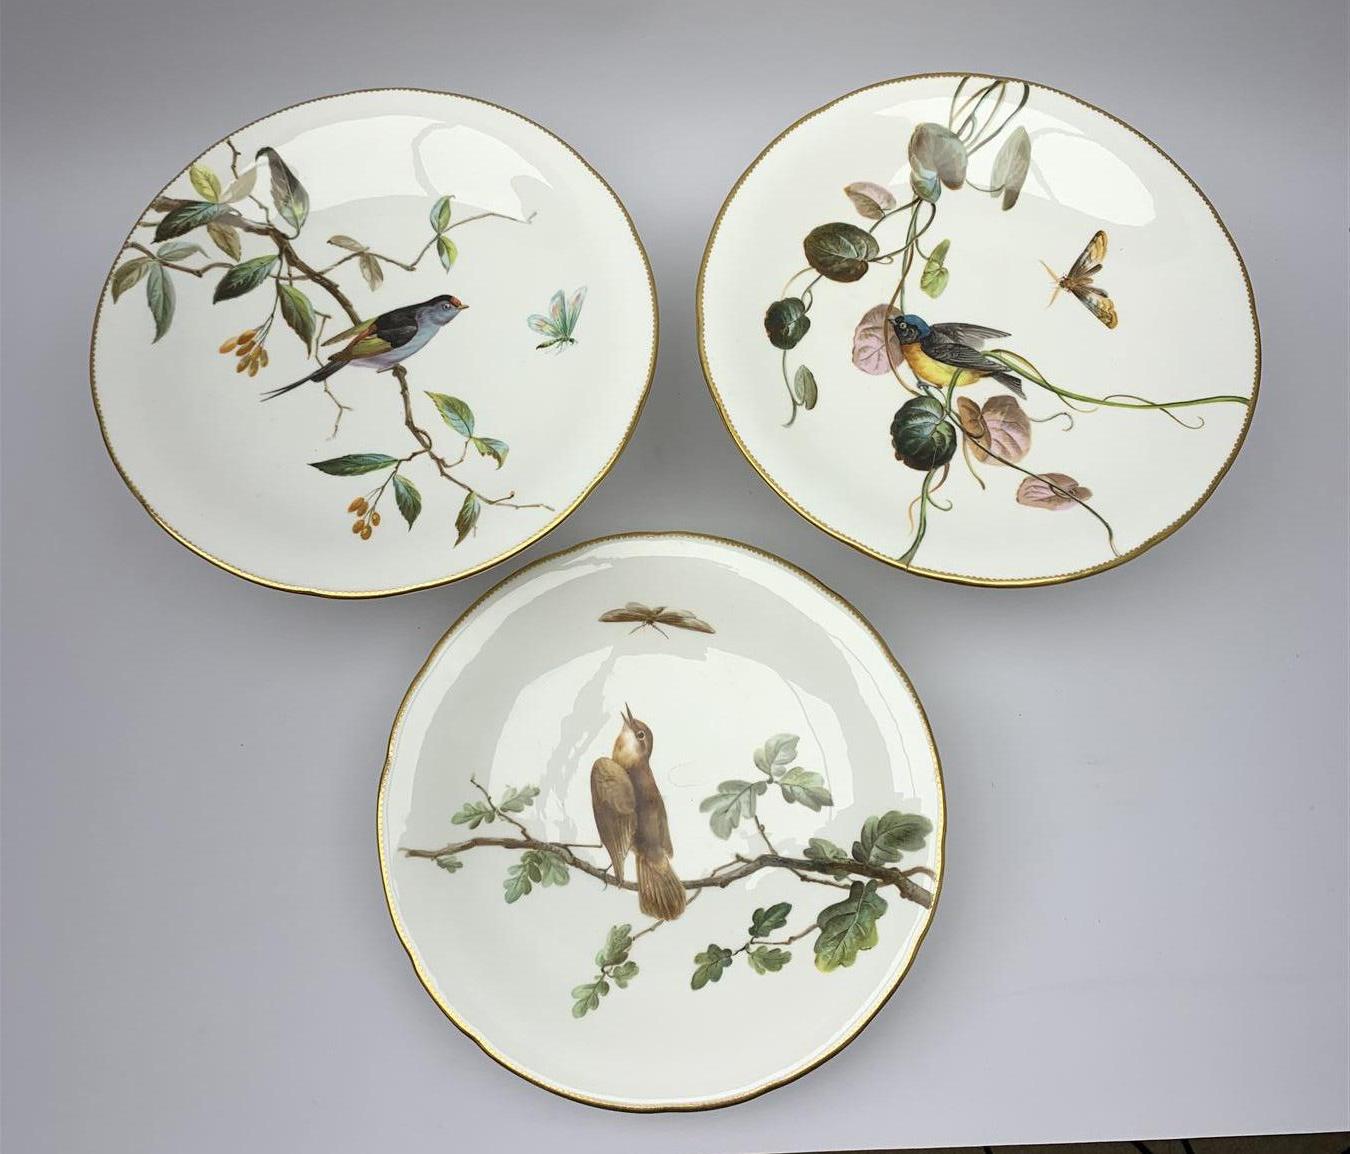 Porcelain 19th Century Minton Bird and Insect Dessert Service 17 Pieces For Sale